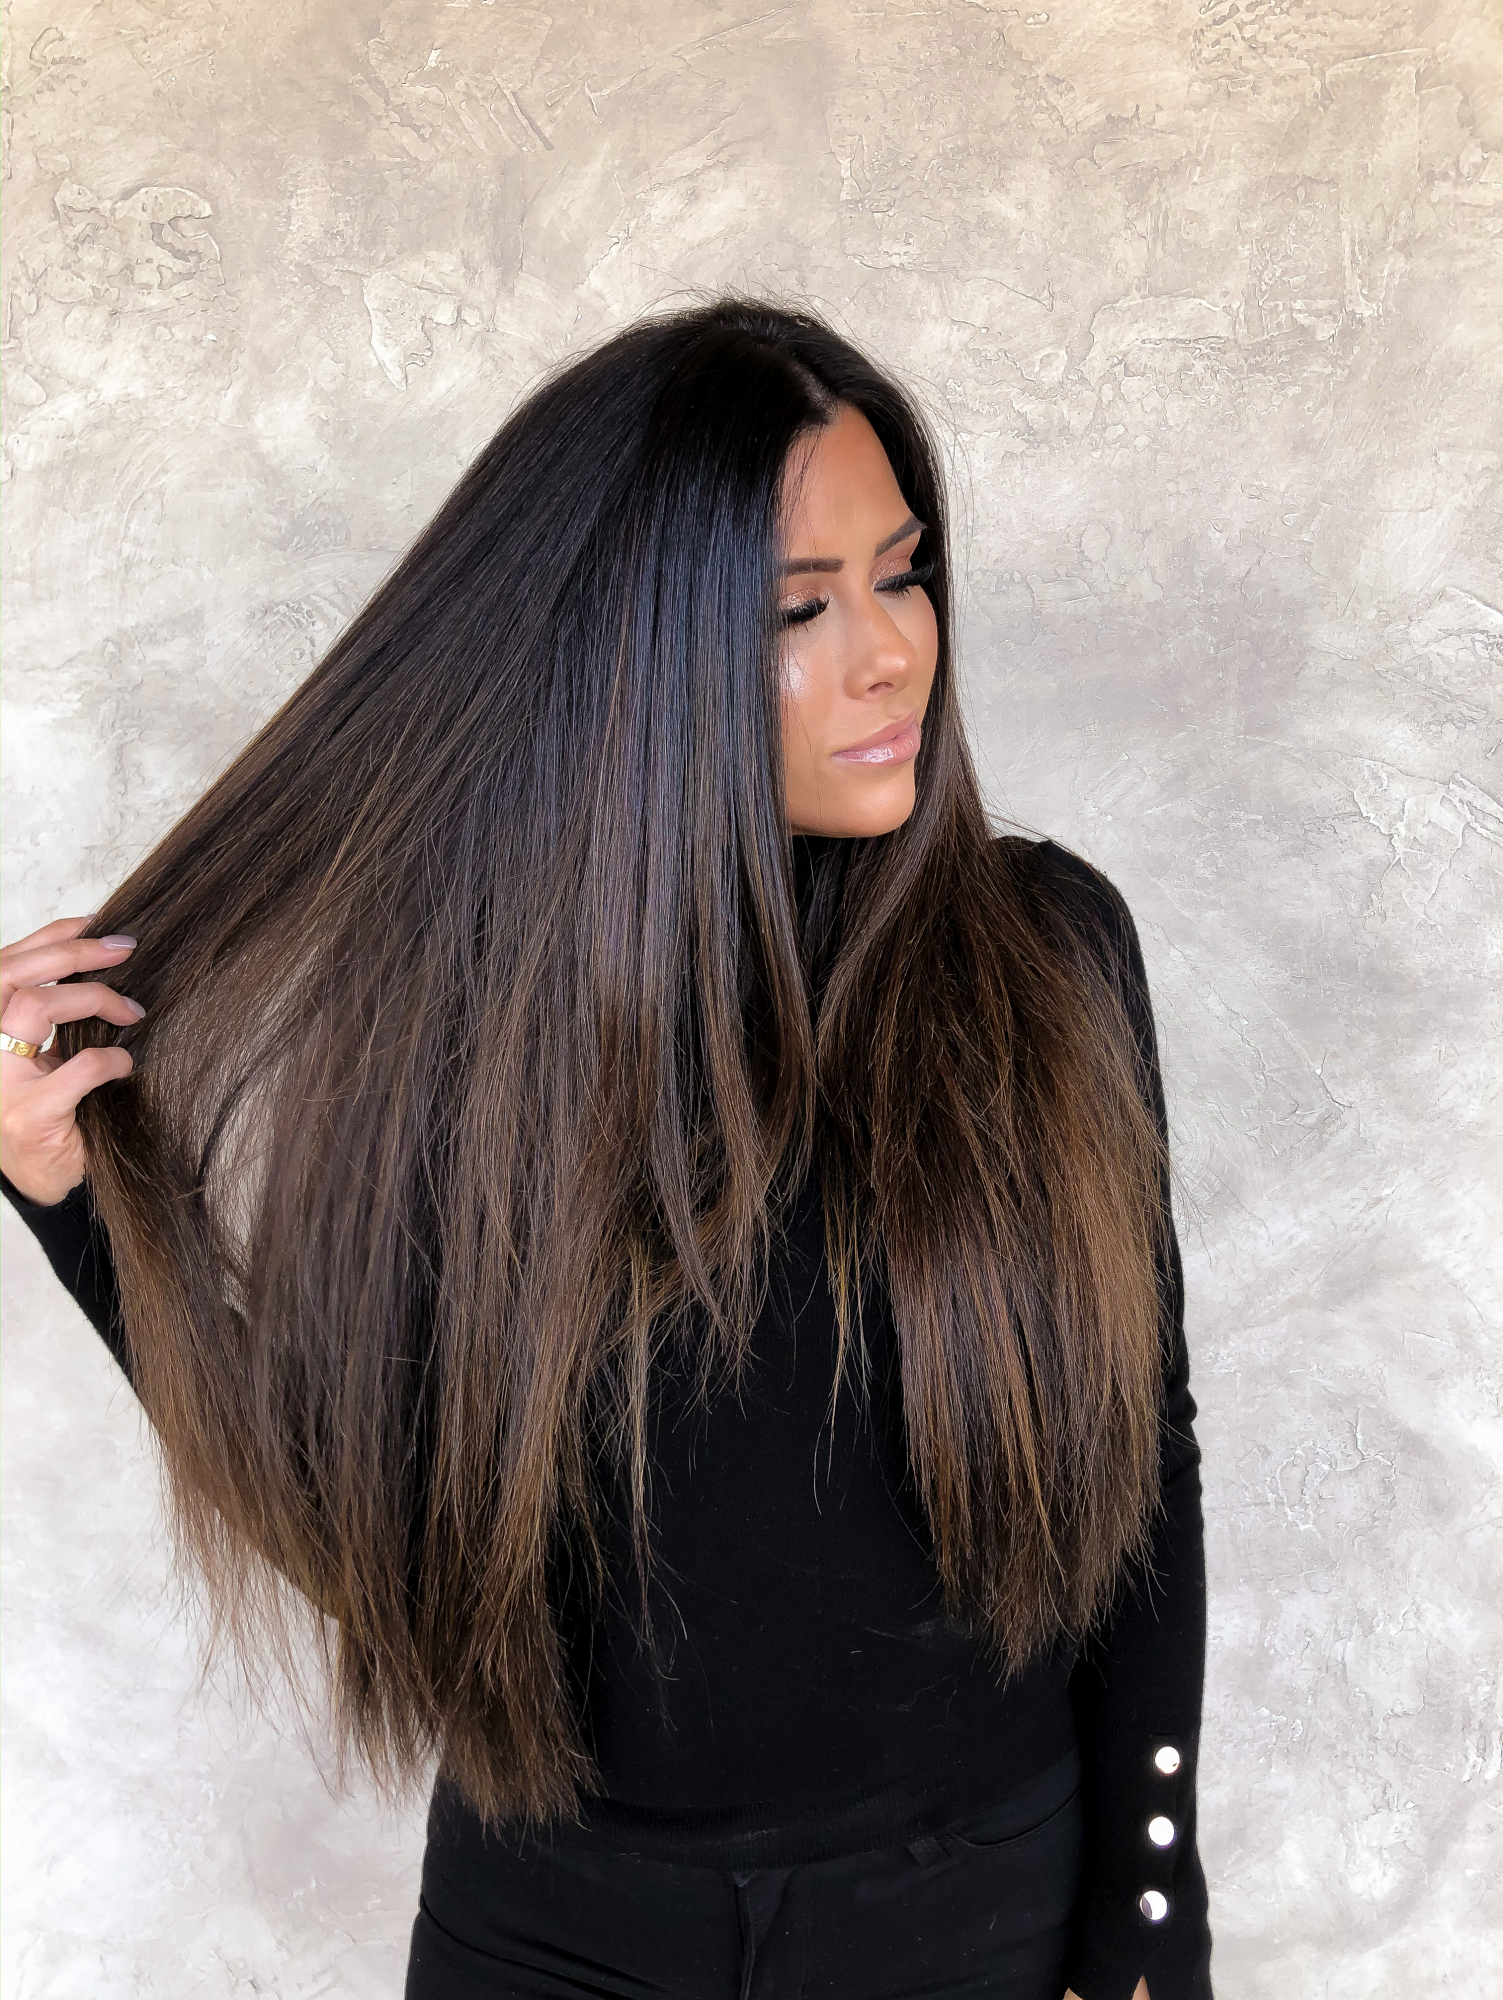 brunette balayage hair extensions, pinterest brunette balayage, Hand tied hair extensions | BEST HAIR PRODUCTS FOR 2019💁🏻‍♀️ || PART 1 by popular US beauty blog, The Sweetest Thing: image of a woman with brunette hair extensions. 